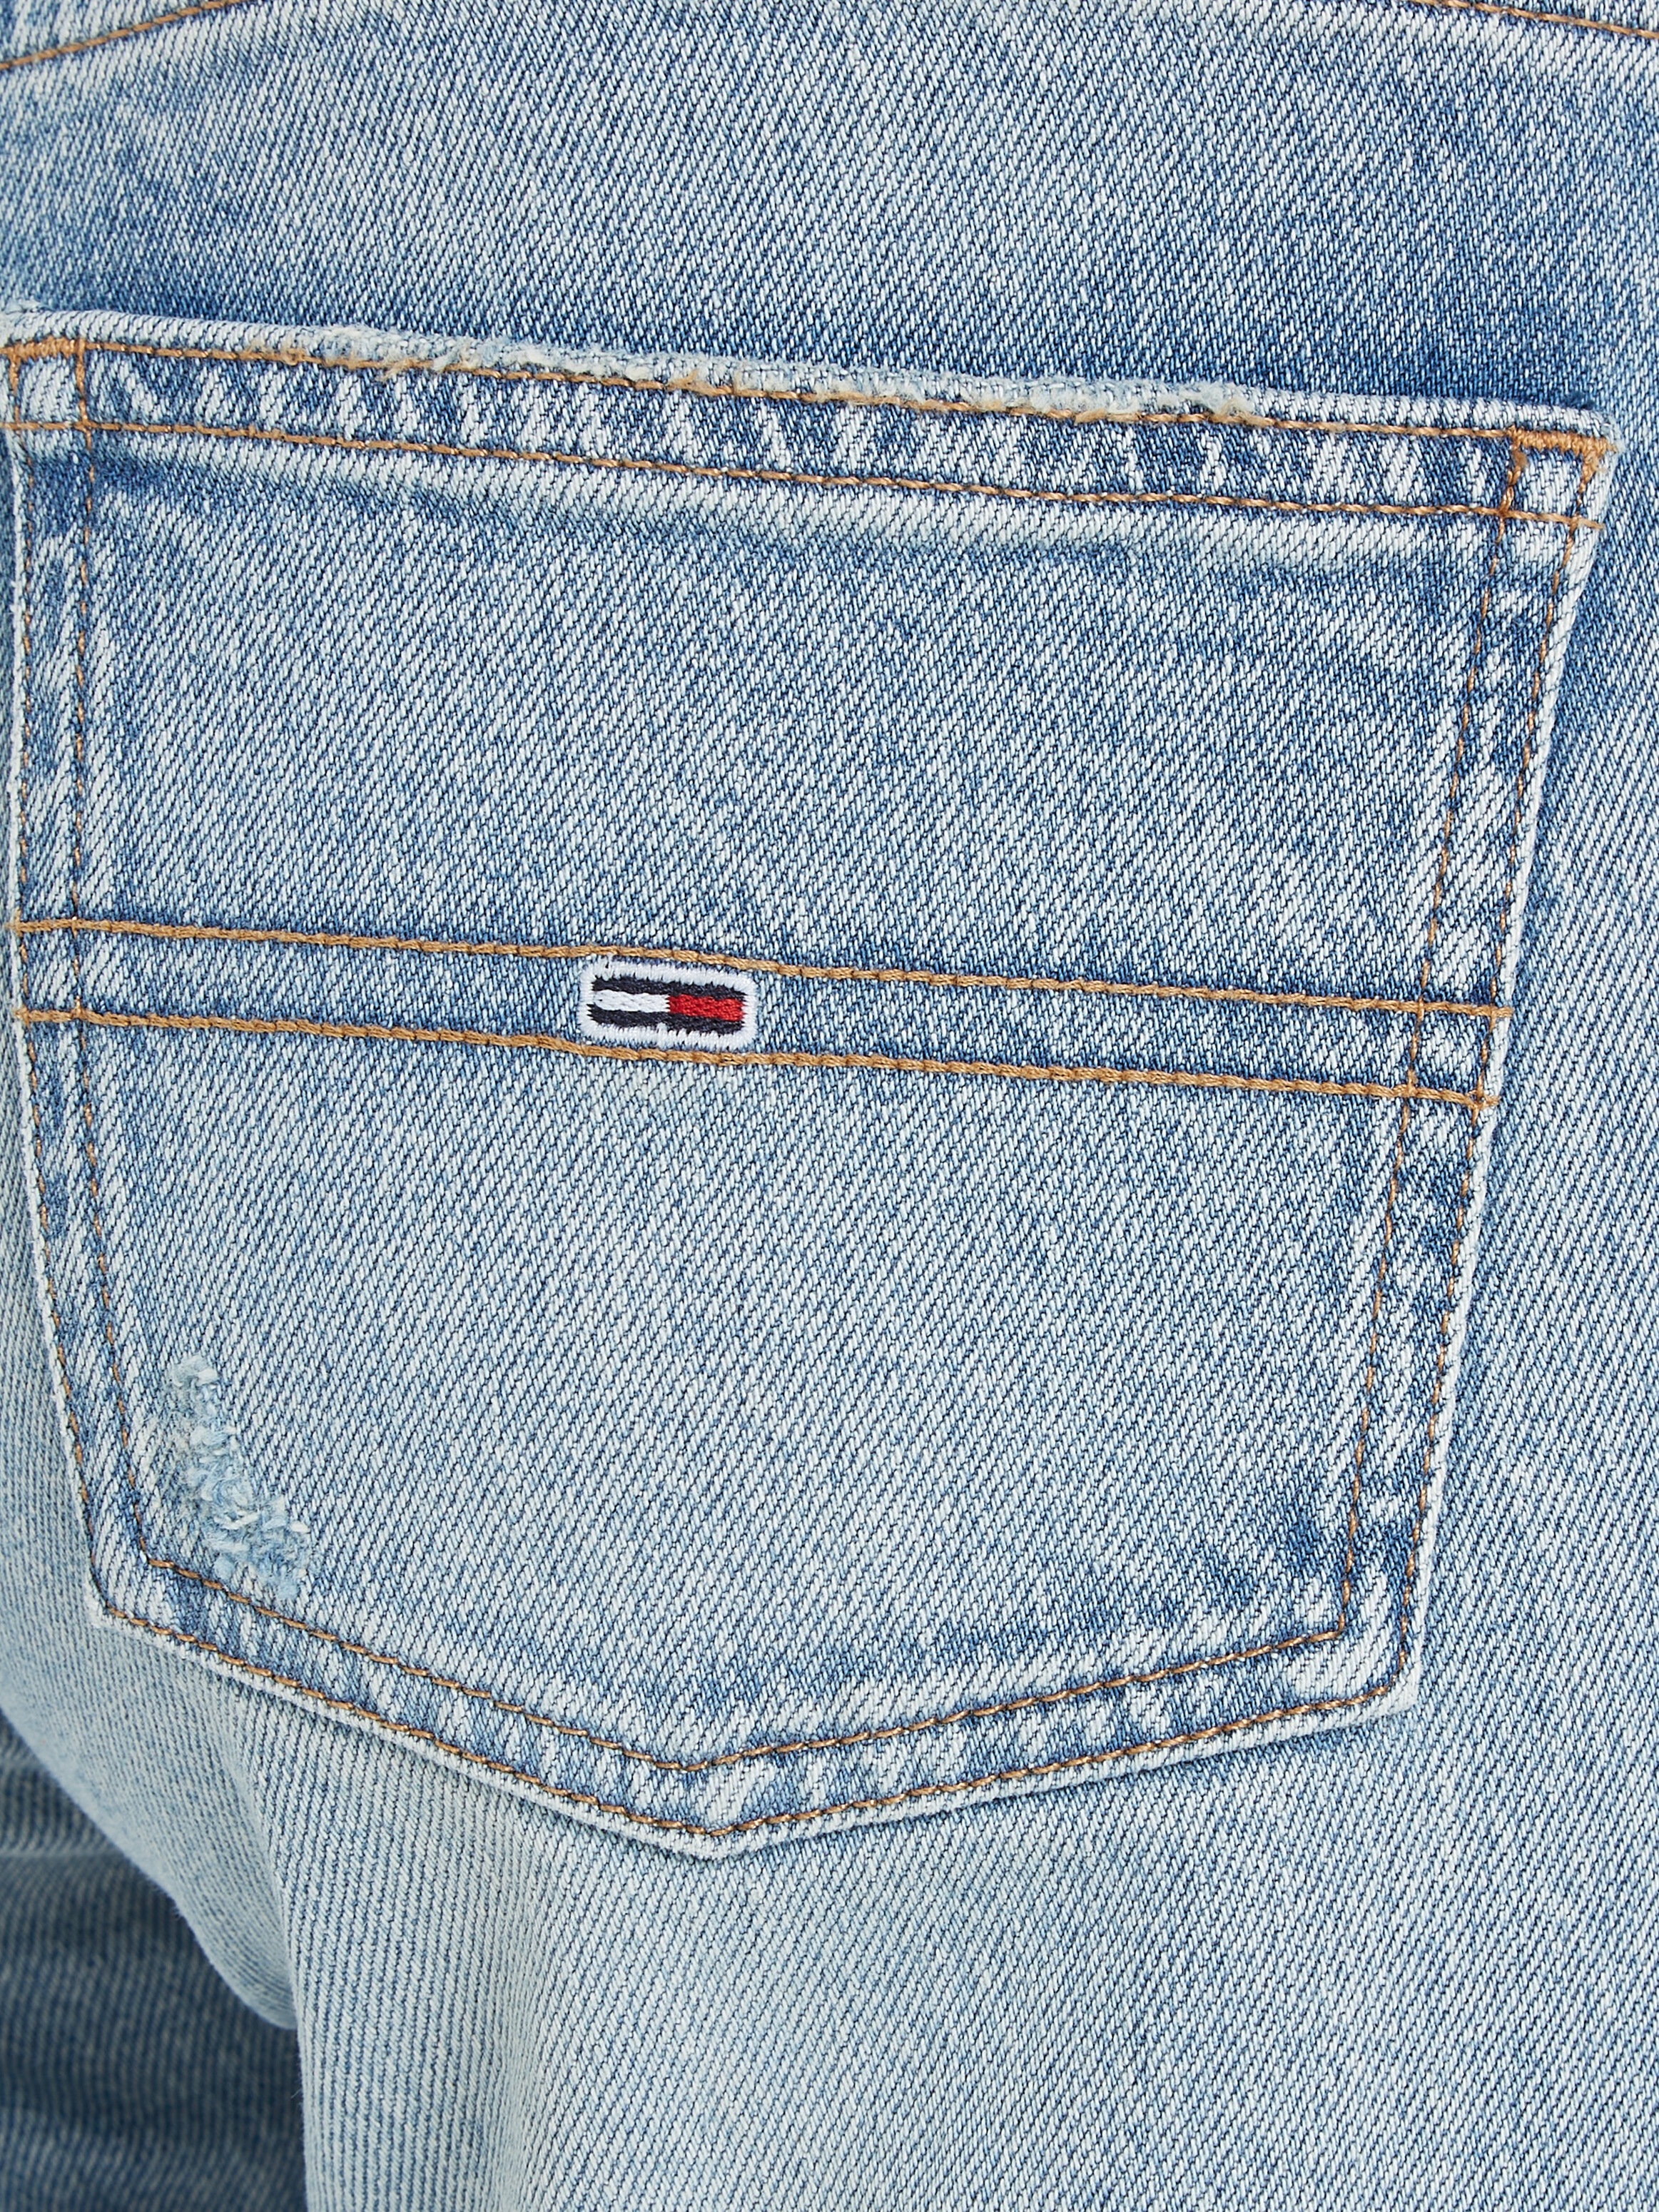 mit Labelflags Logobadge bei Tommy Straight-Jeans, Jeans und online